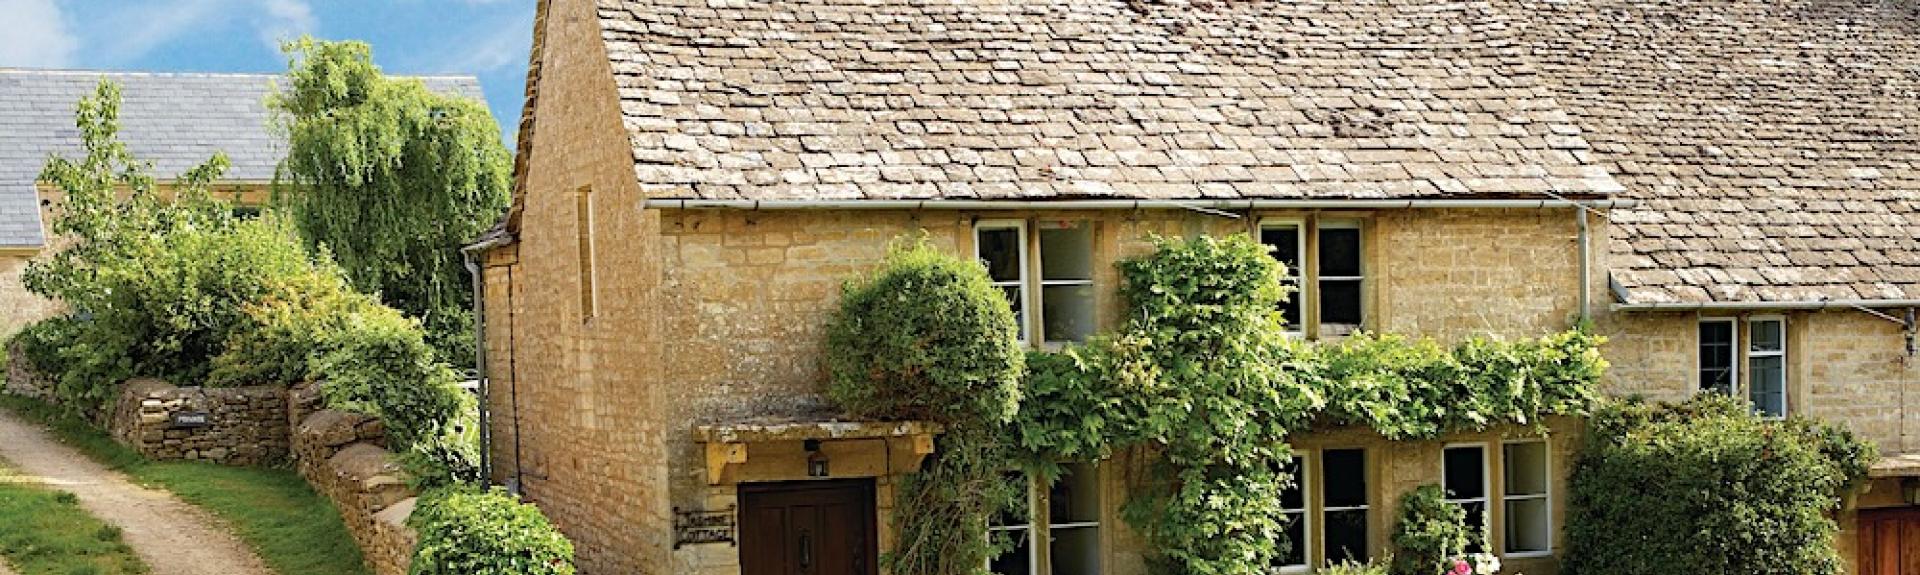 A jasmine-clad, semi-detached, traditional Cotswold 'honeystone' country cottage. 